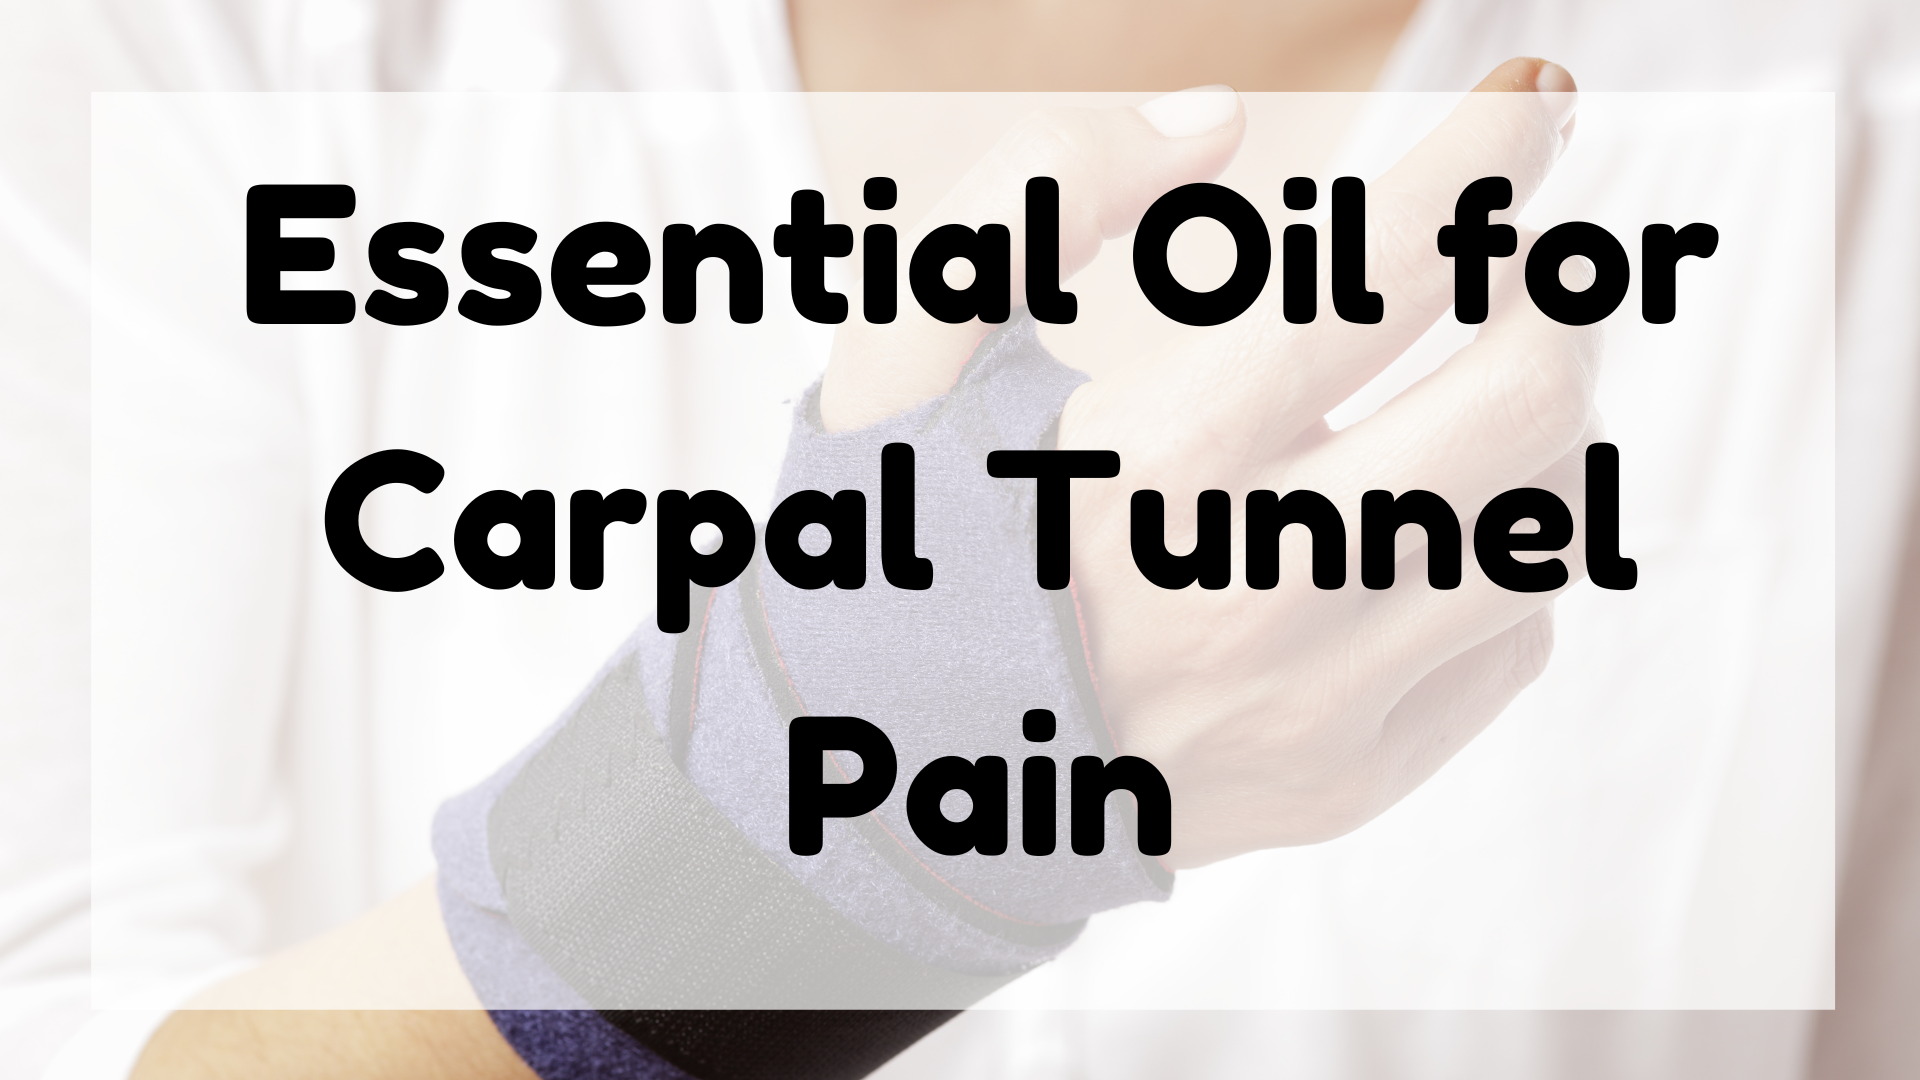 Essential Oil for Carpal Tunnel Pain featured image